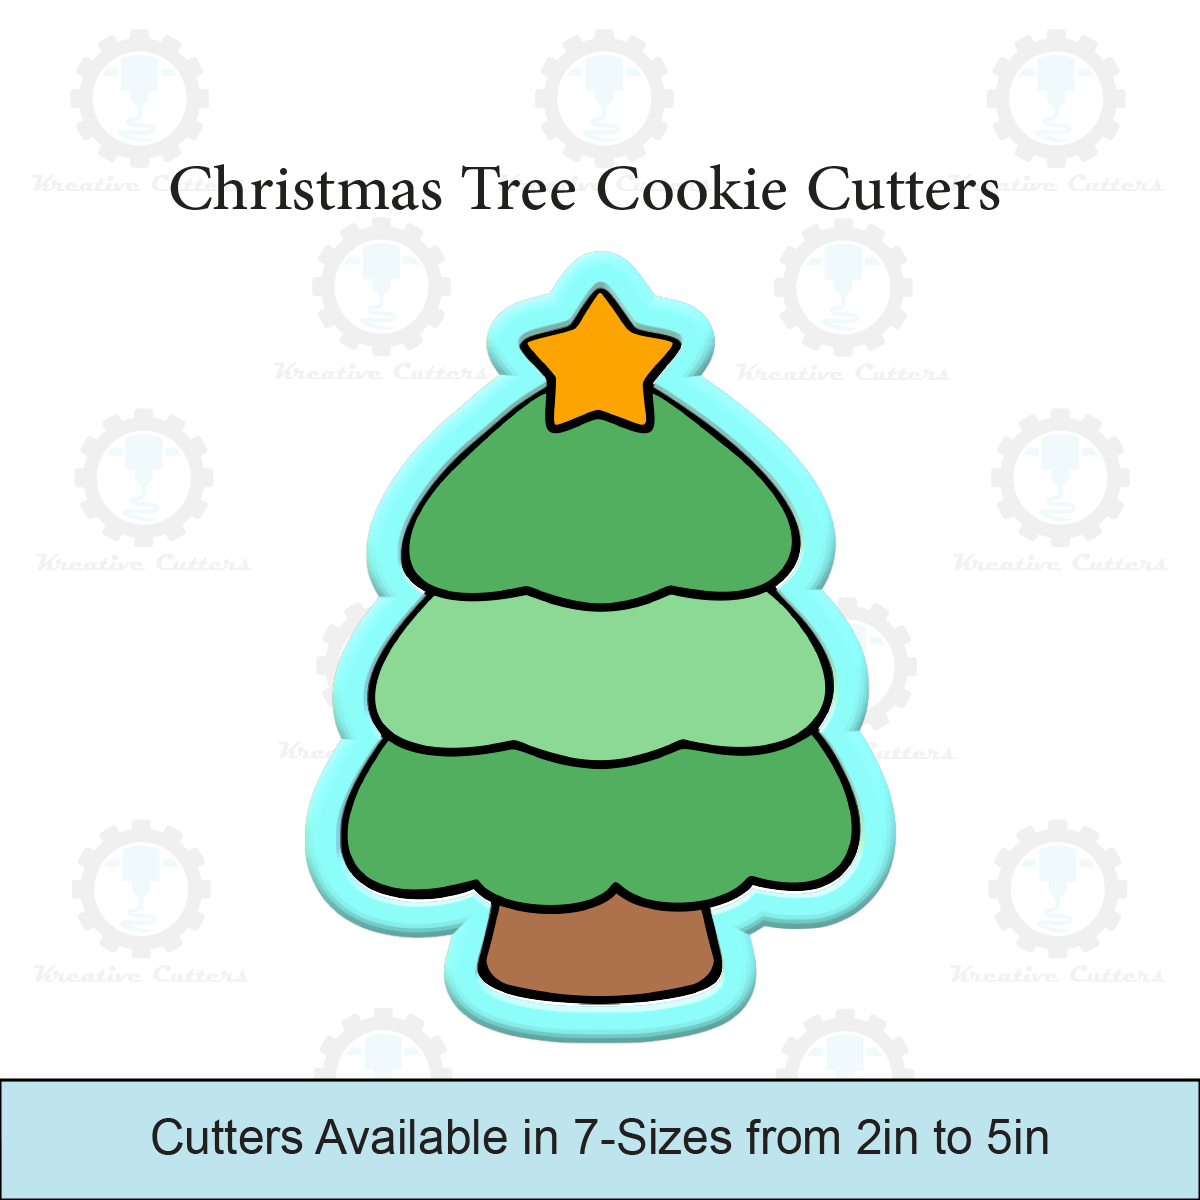 Christmas Tree Cookie Cutters